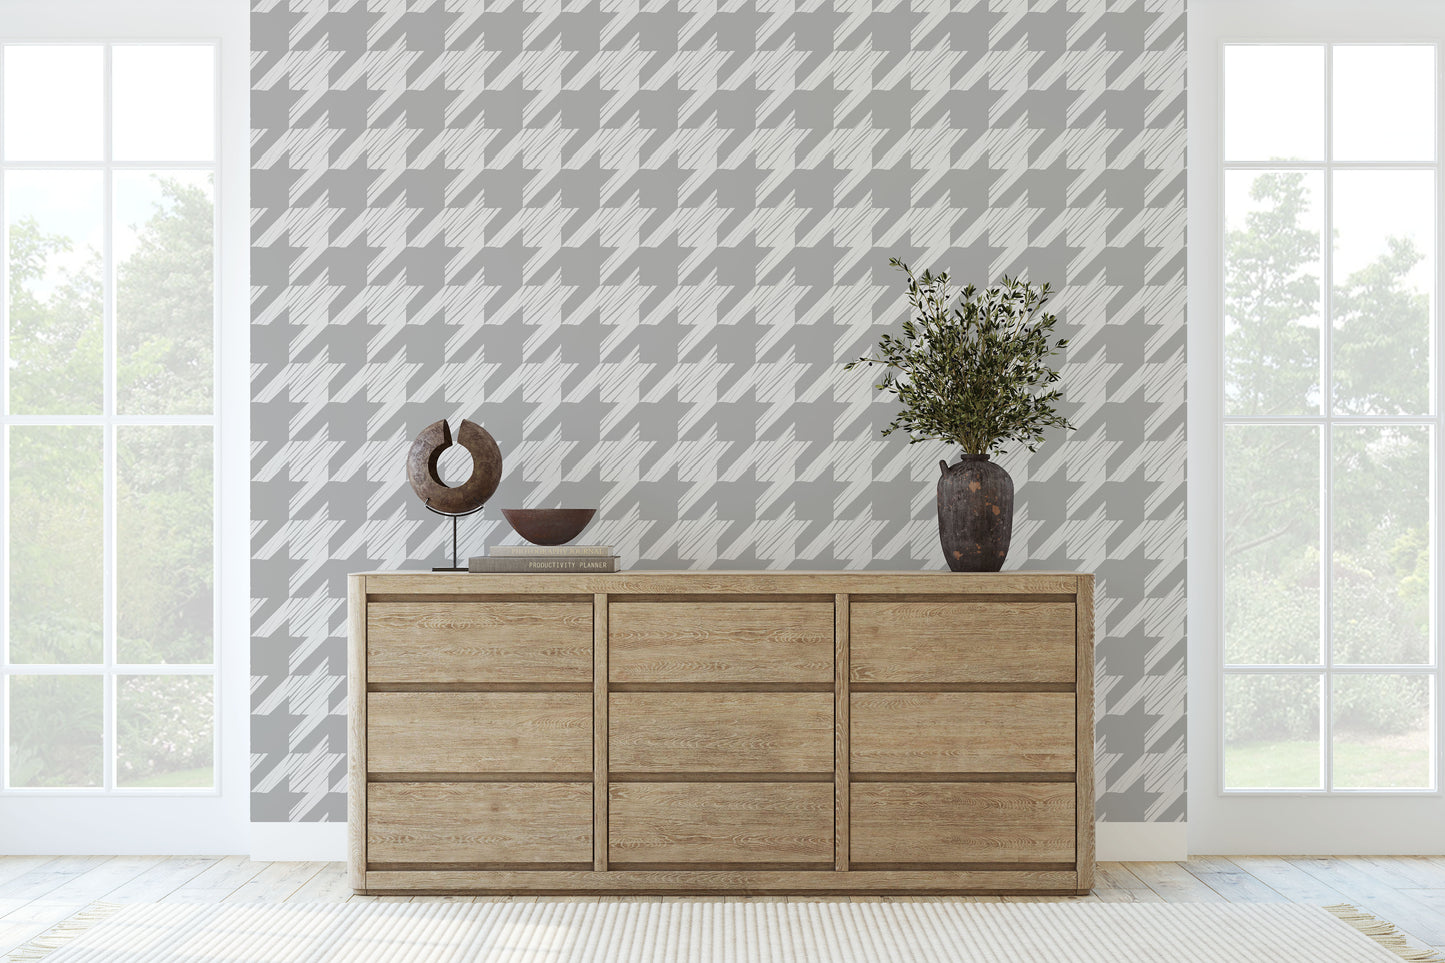 Neutral Fish Wallpaper - Waterproof, Removable, Washable, Durable,  Customizable & Commercial Grade